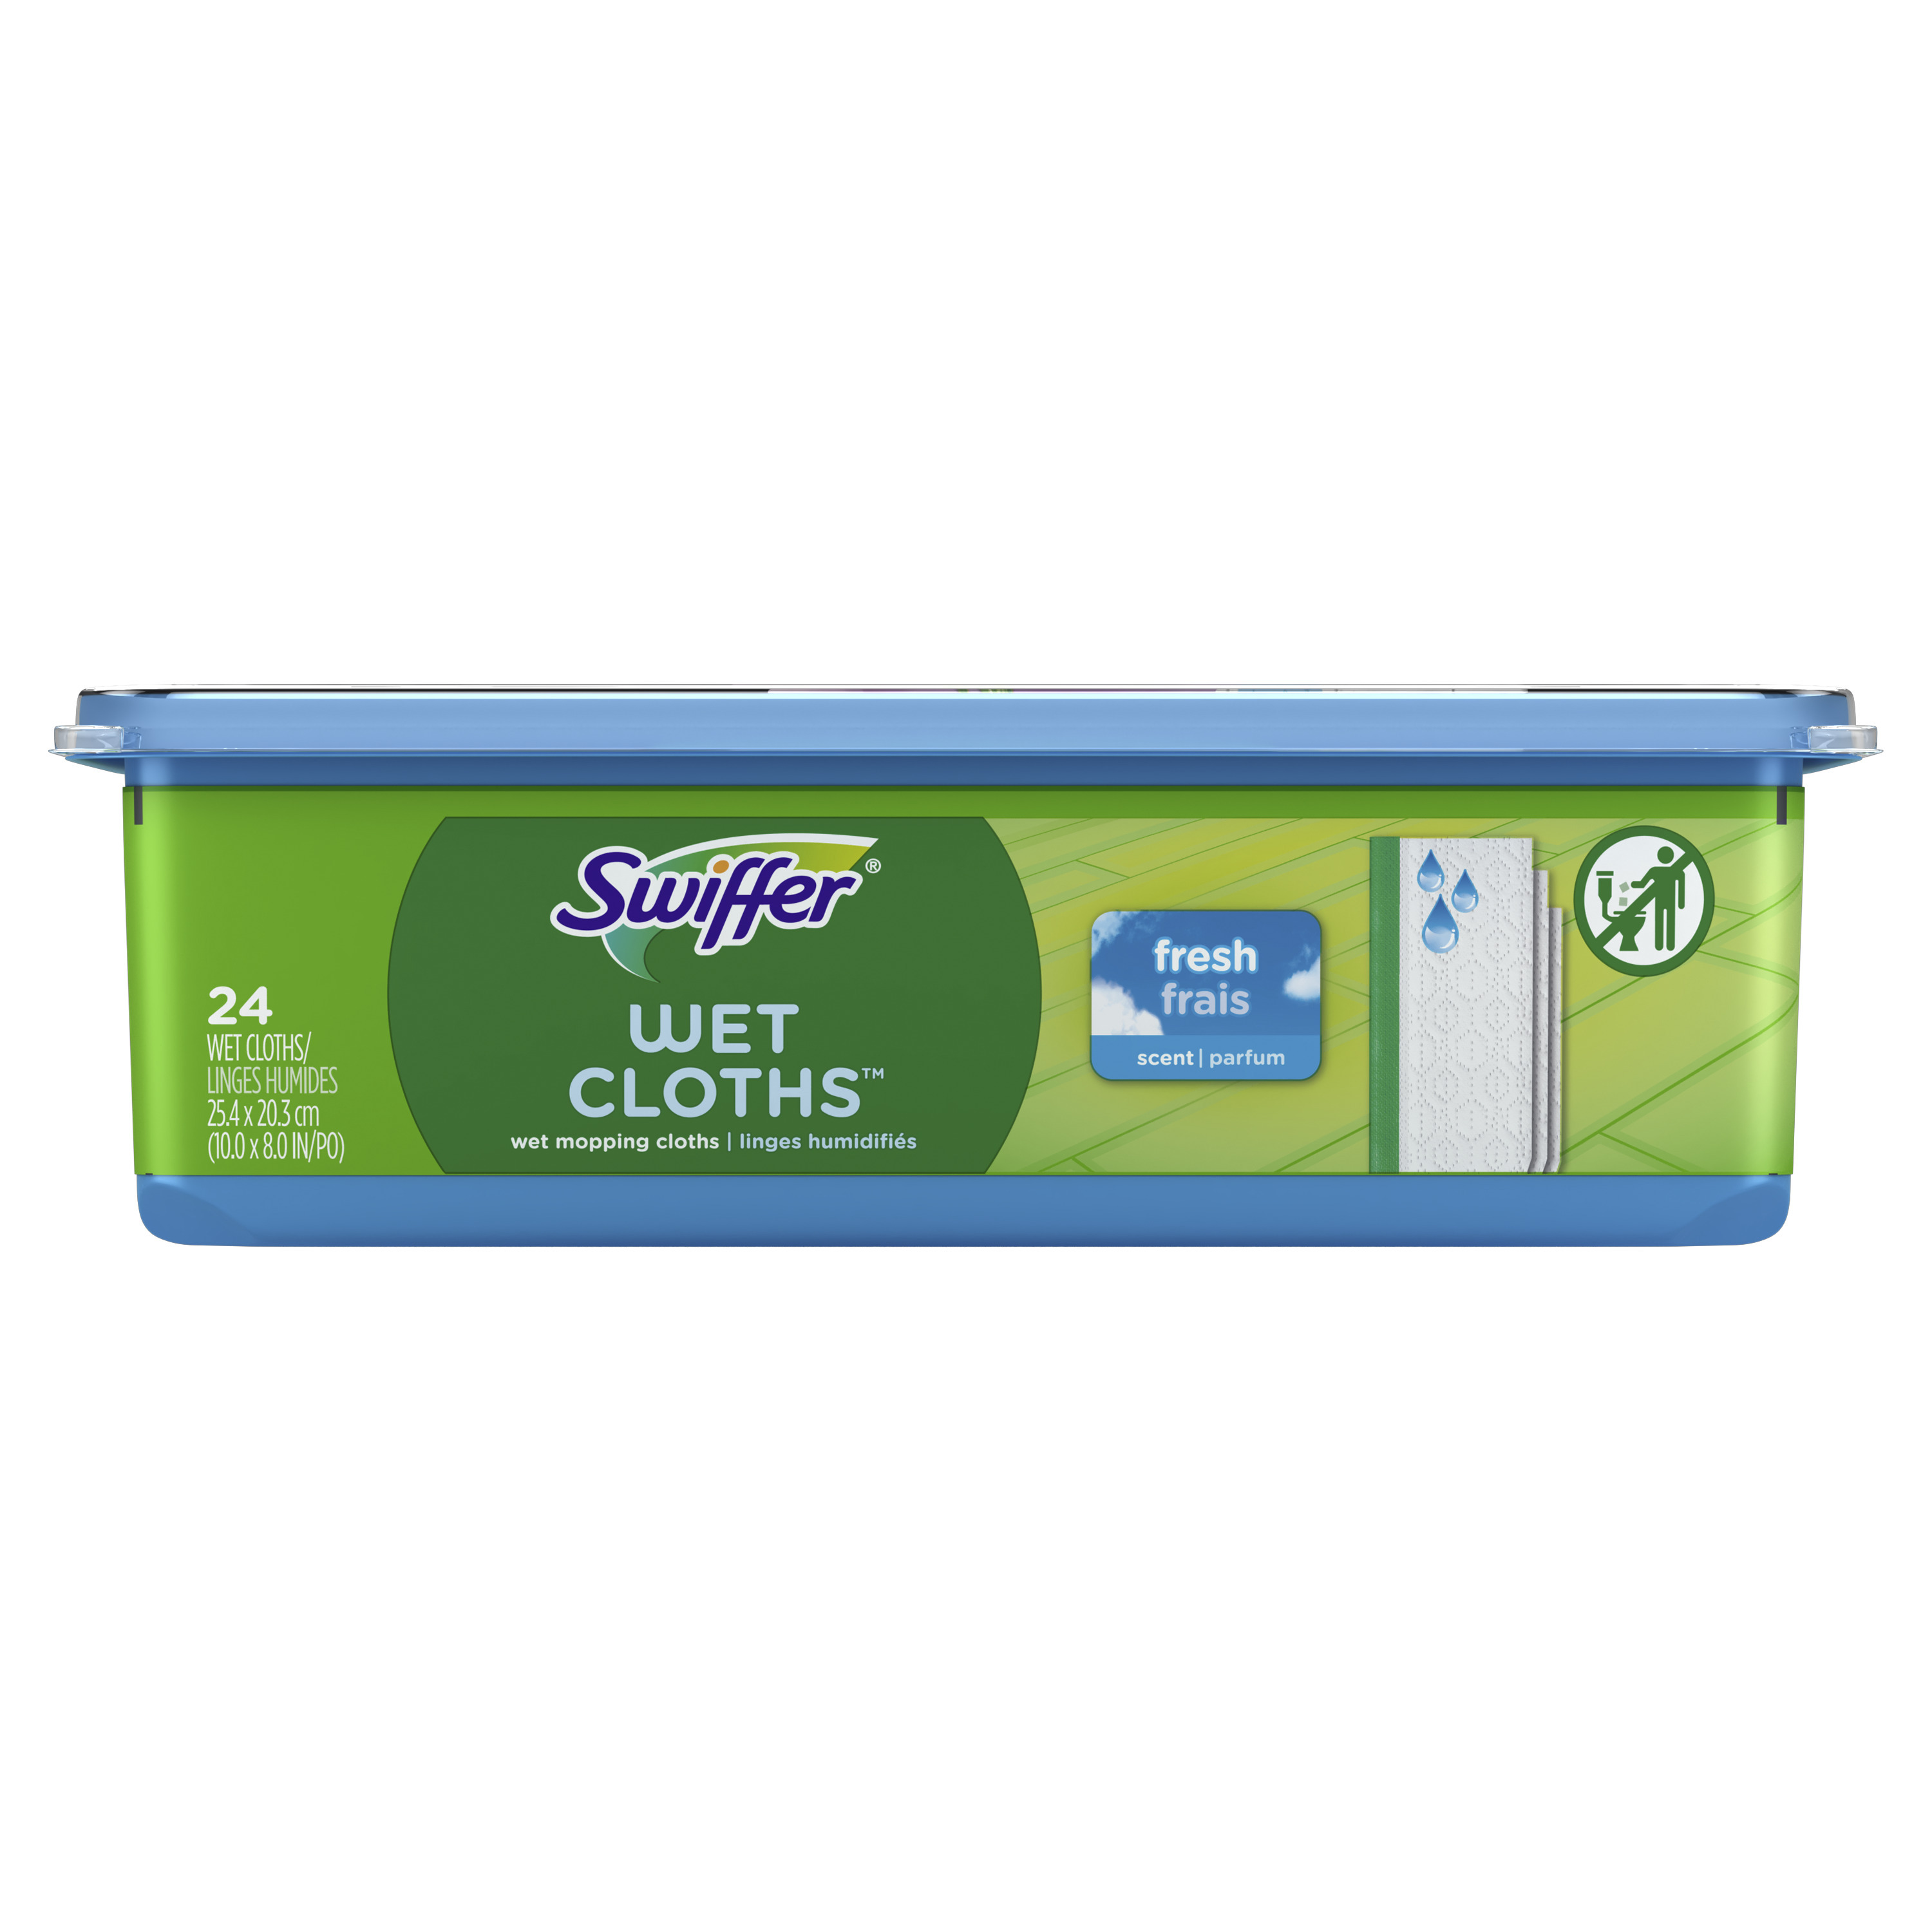 Swiffer Sweeper Wet Mopping Cloths, Multi-Surface Floor Cleaner, Fresh Scent, 24 Count - image 12 of 16